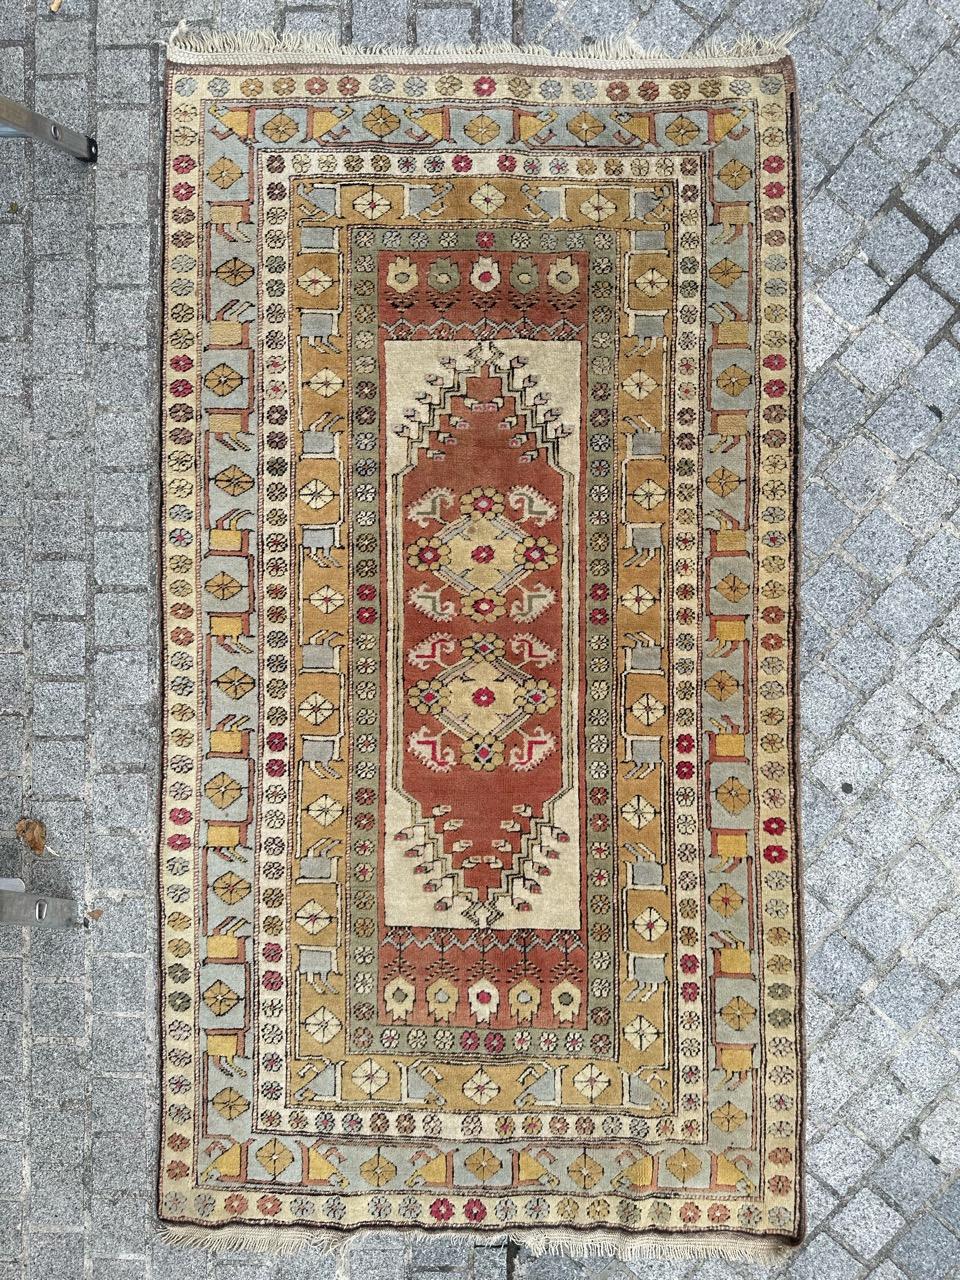 Discover this exquisite mid-century Turkish rug, a true masterpiece of craftsmanship. Hand-knotted with precision using soft wool velvet on a wool foundation, it boasts a stunning geometrical design and a palette of lovely light colors. The light